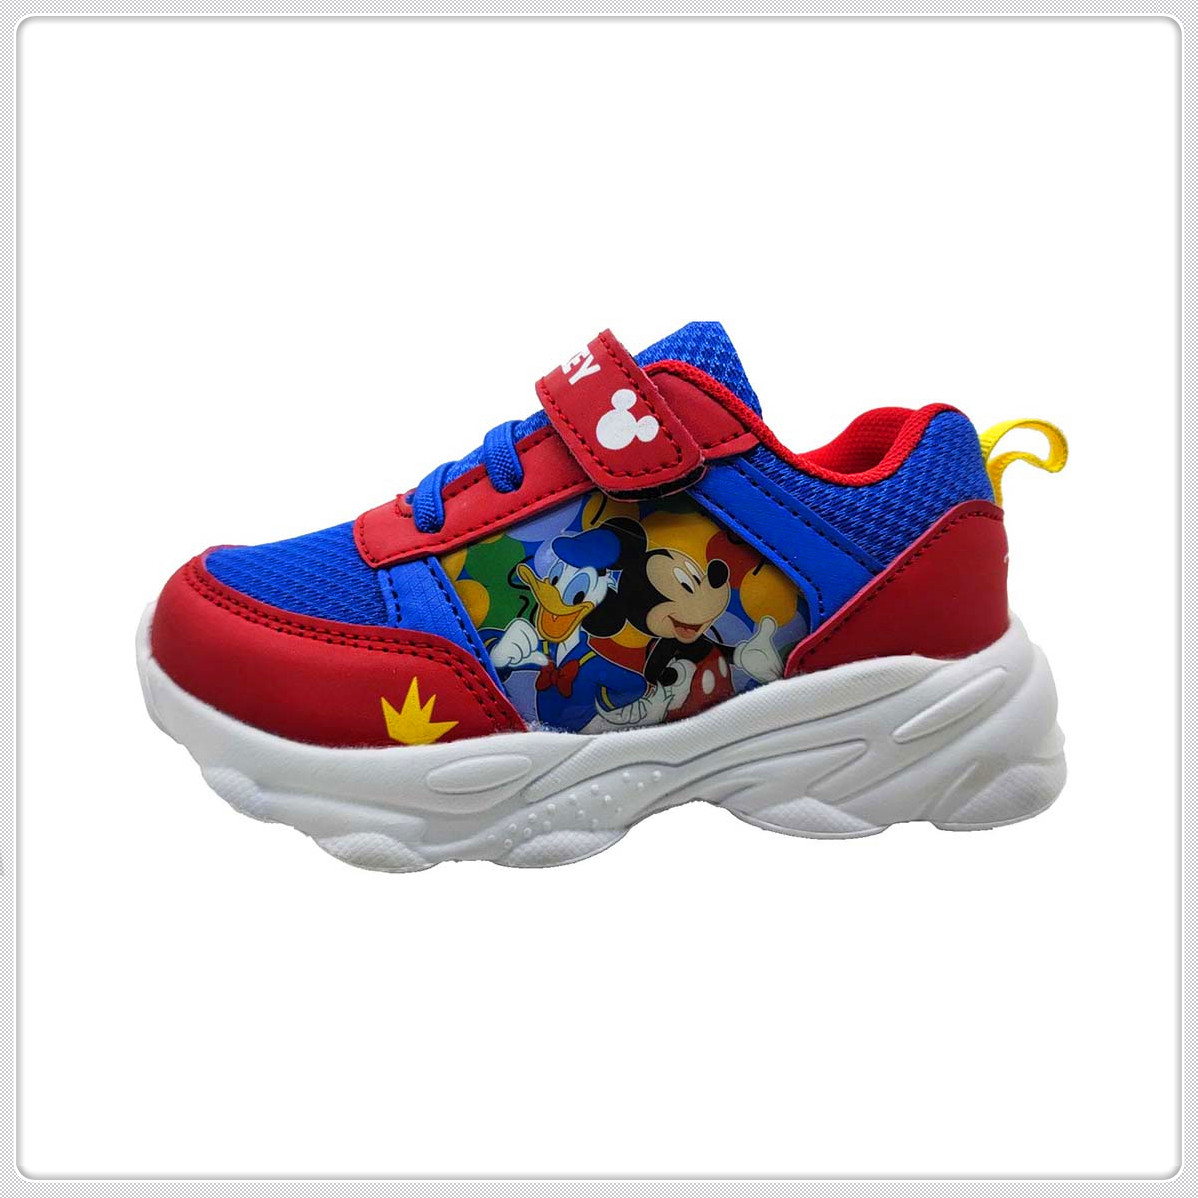  Kid Shoes, Sneaker Shoes, Children Shoes, Custom shoes Mesh+PU with PVC Patch on Upper, PU Velcro EVA Outsole